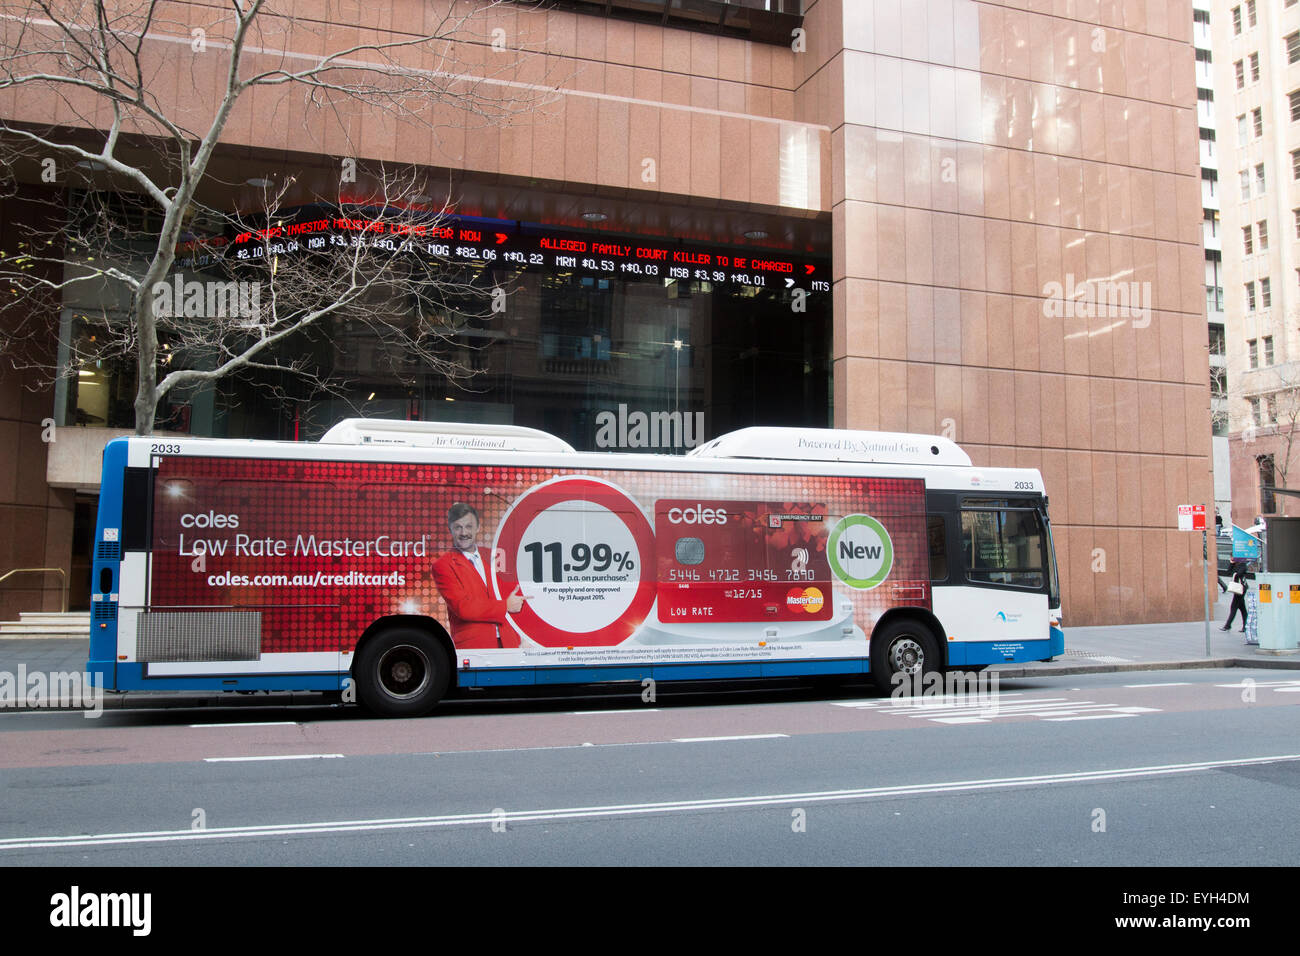 Sydney bus in elizabeth street in the central business district, bus is advertising Coles credit card,Sydney,Australia Stock Photo